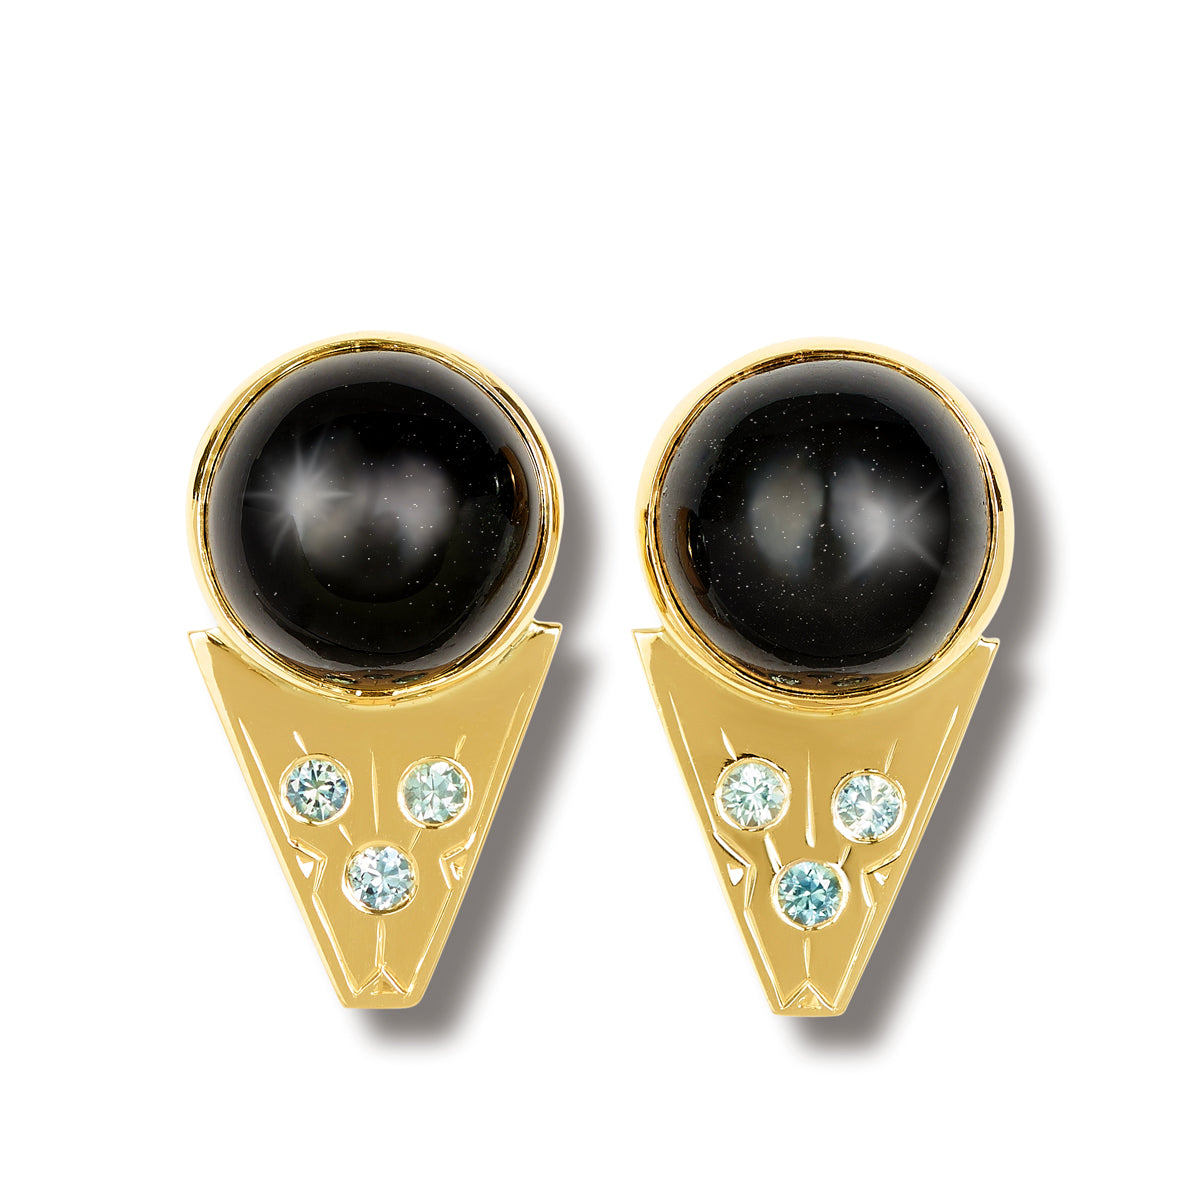 Yellow gold earrings with blue green sapphires and round black star diopside cabochon